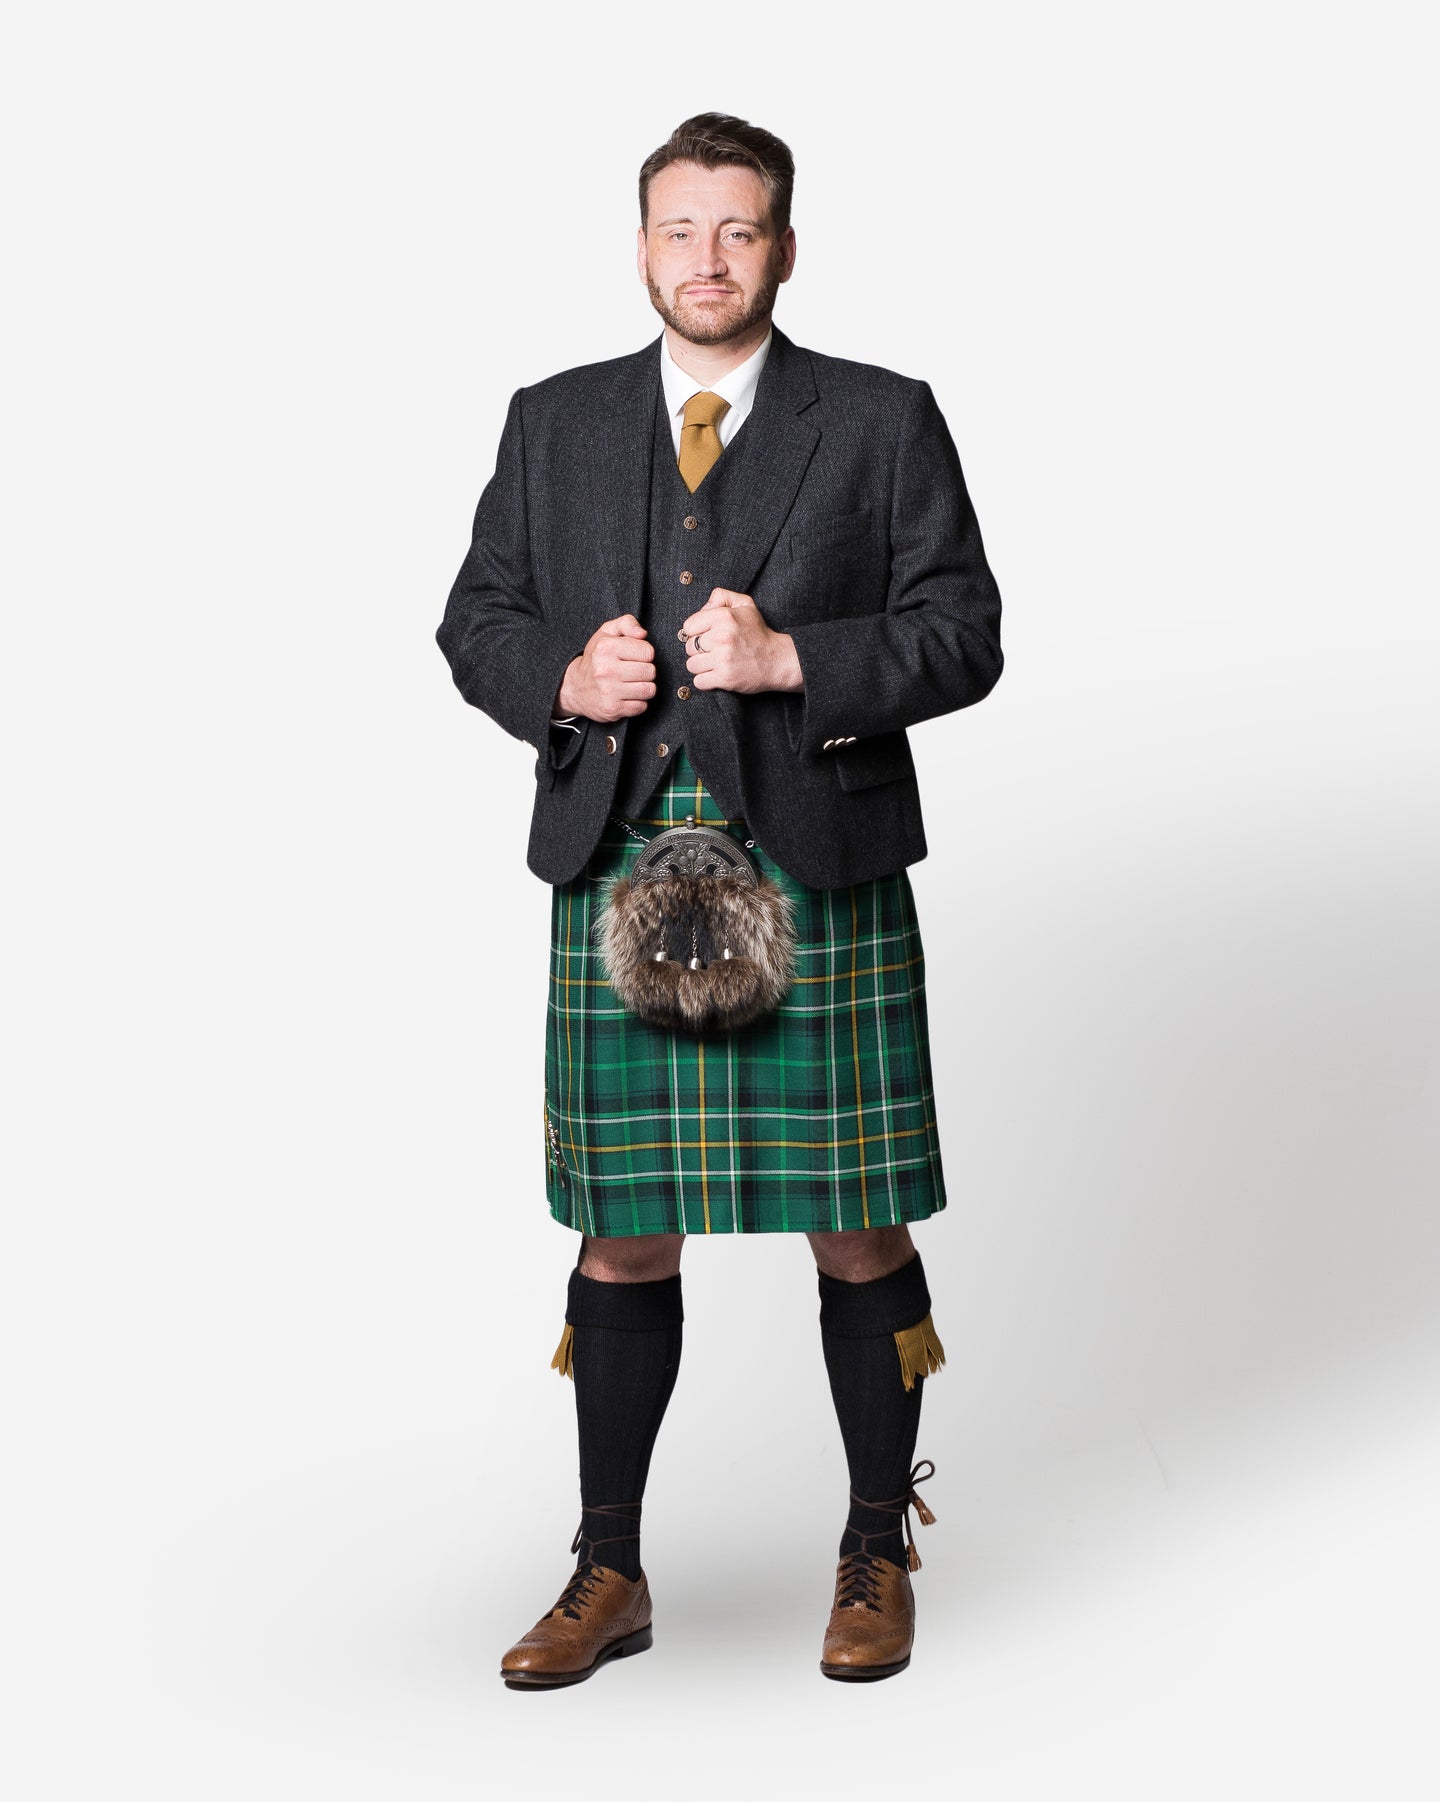 Exclusive Celtic FC tartan kilt and charcoal tweed jacket hire outfit